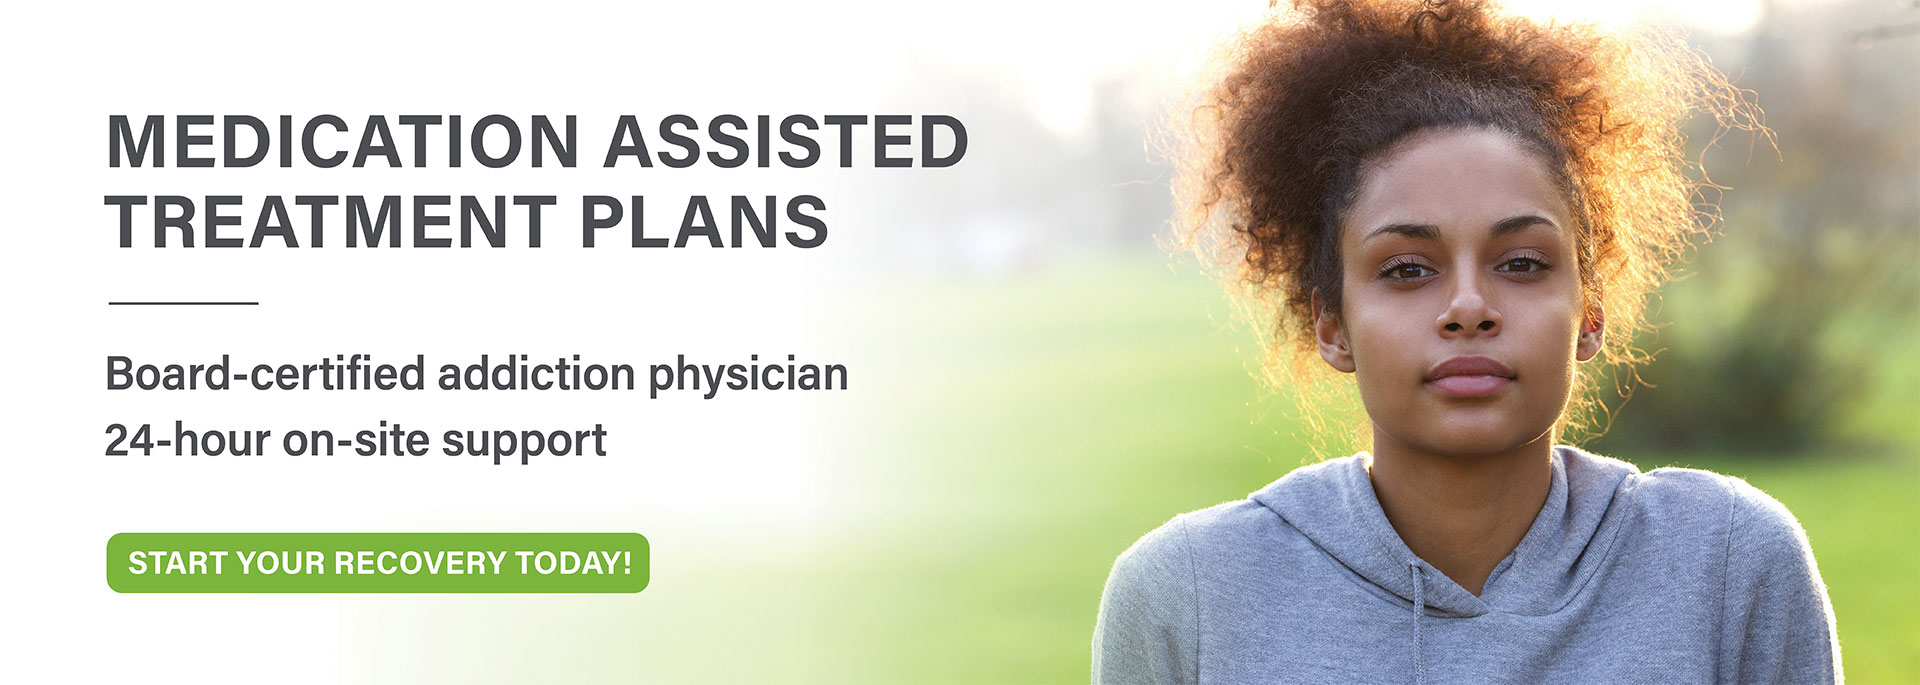 Medication-assisted treatment plans. Board-certified addication physician 24-hour on-site support.